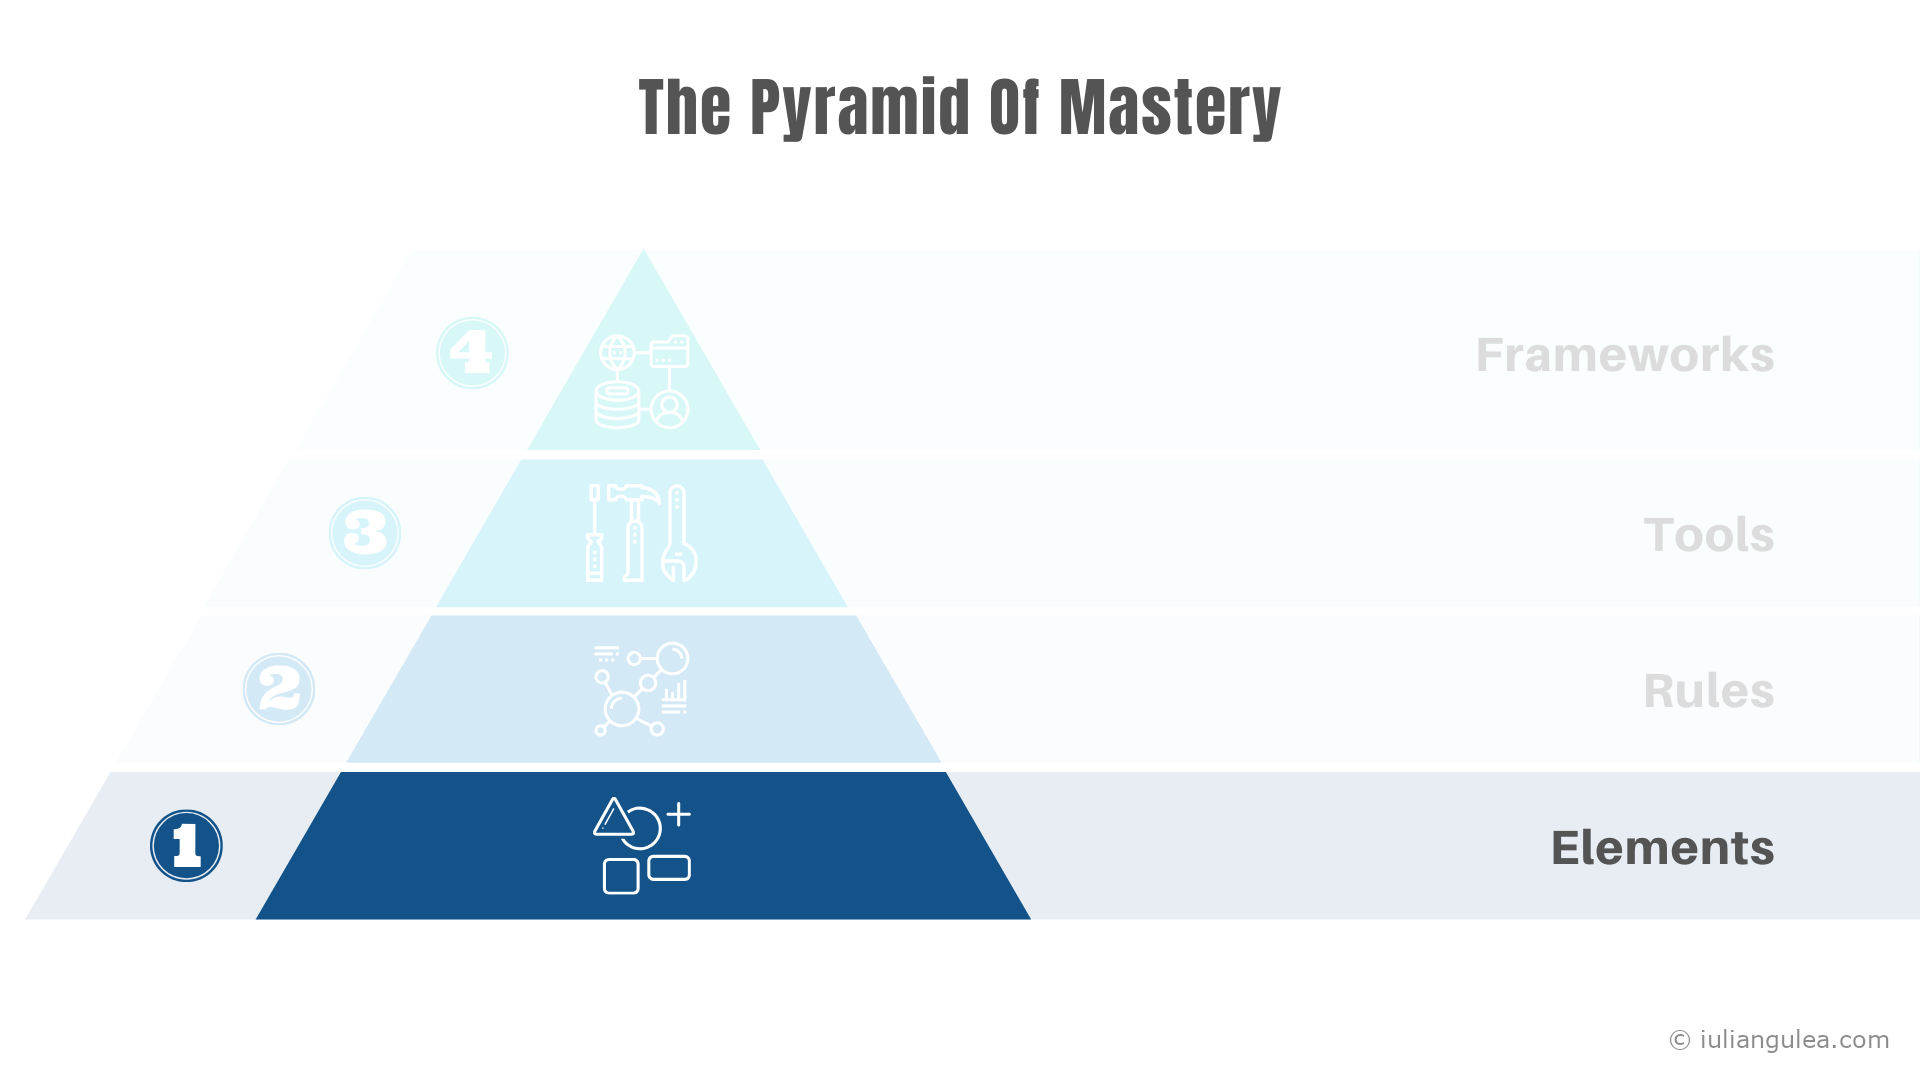 The Pyramid Of Mastery - The Elements